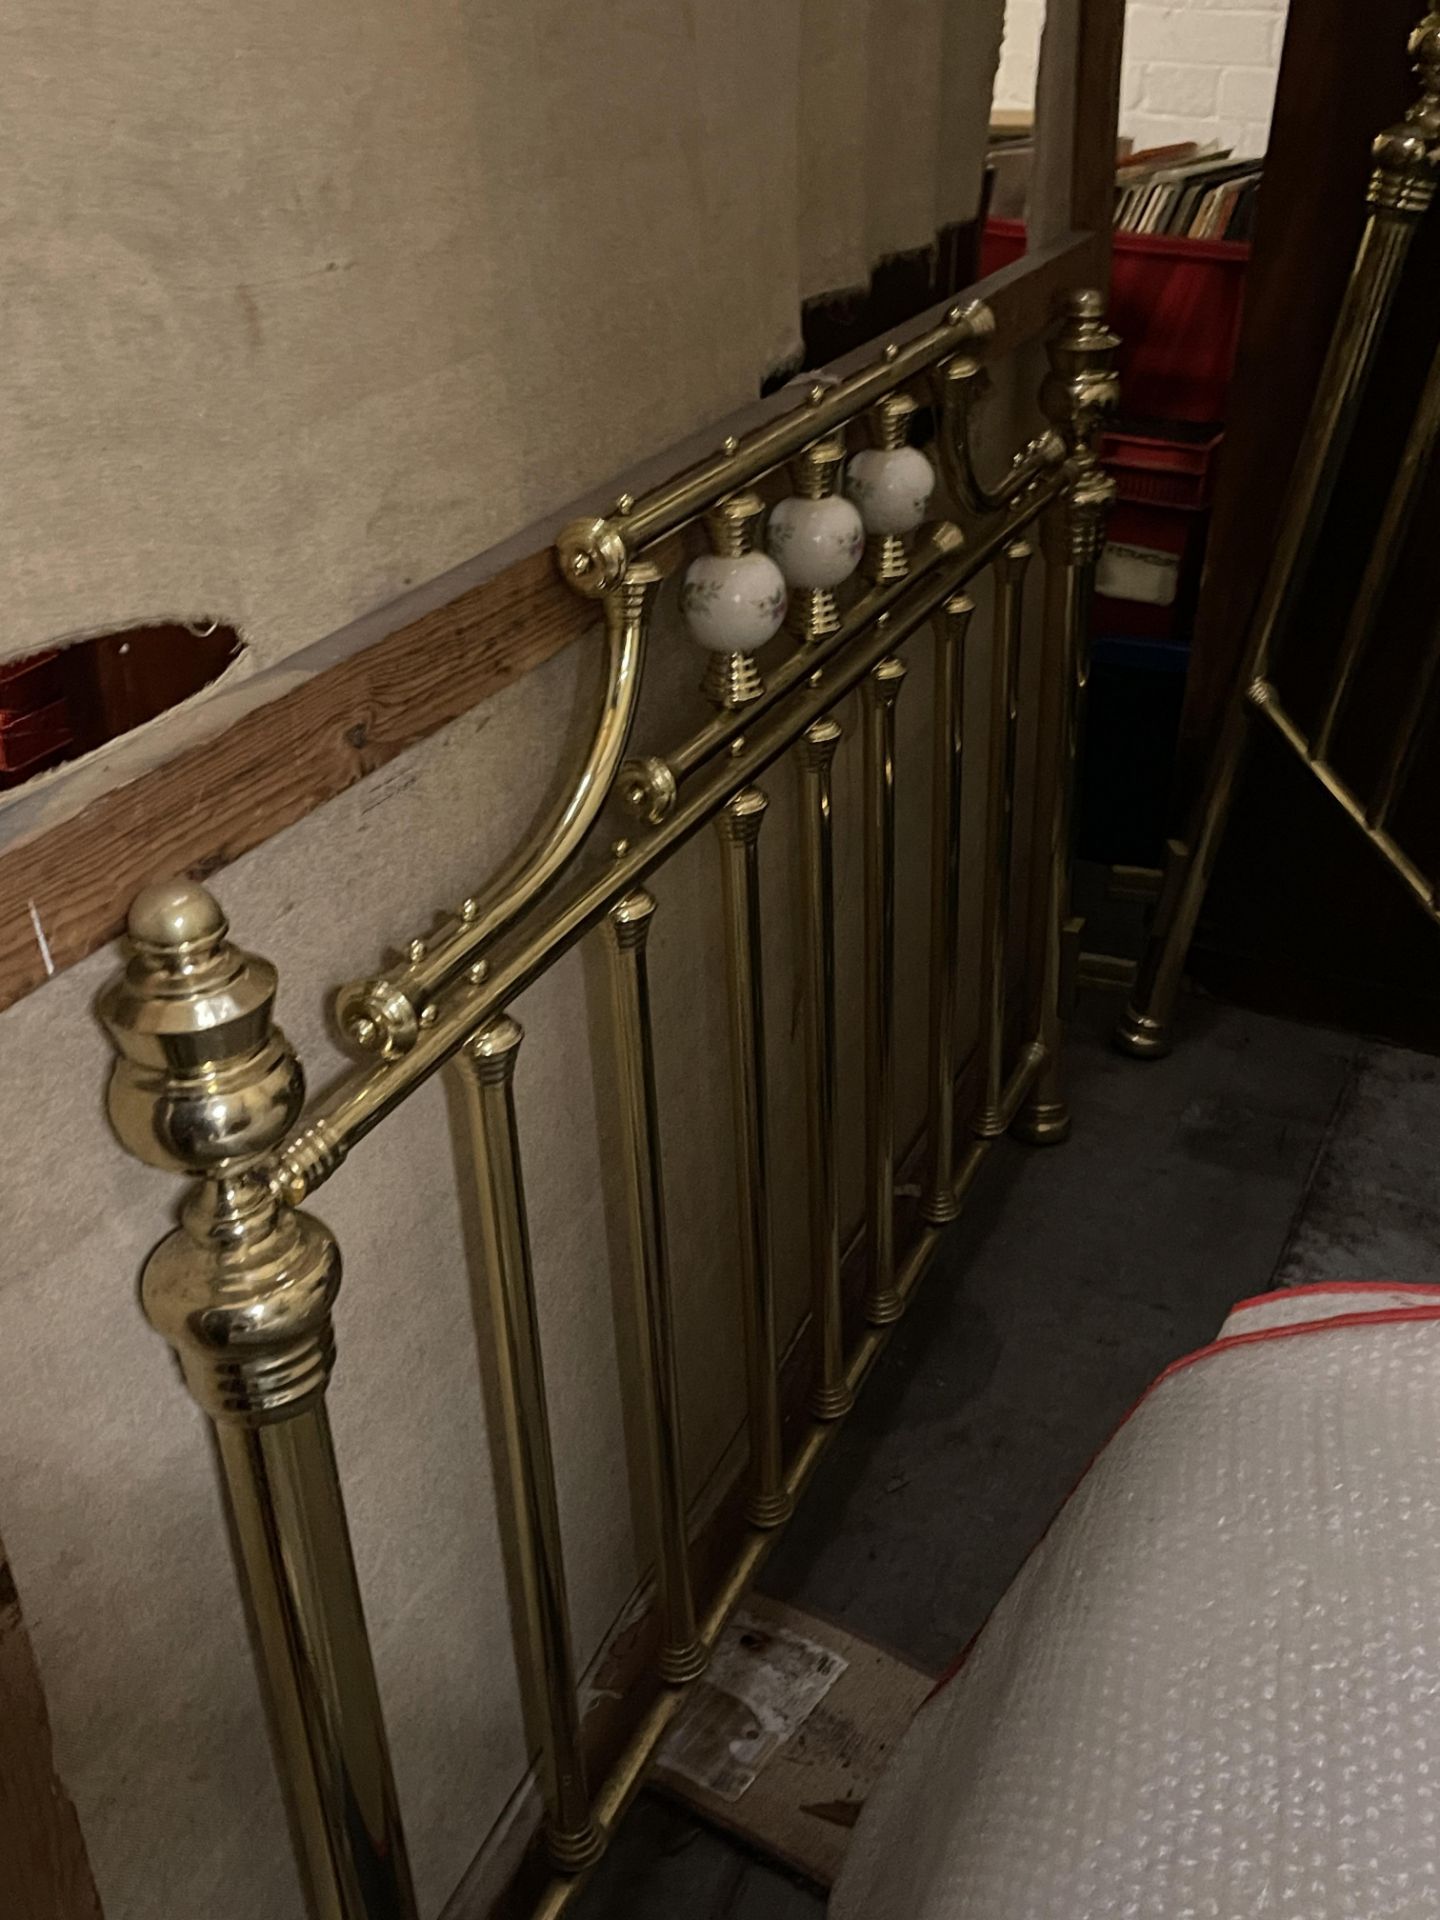 Brass double bed frame very old unclaimed property